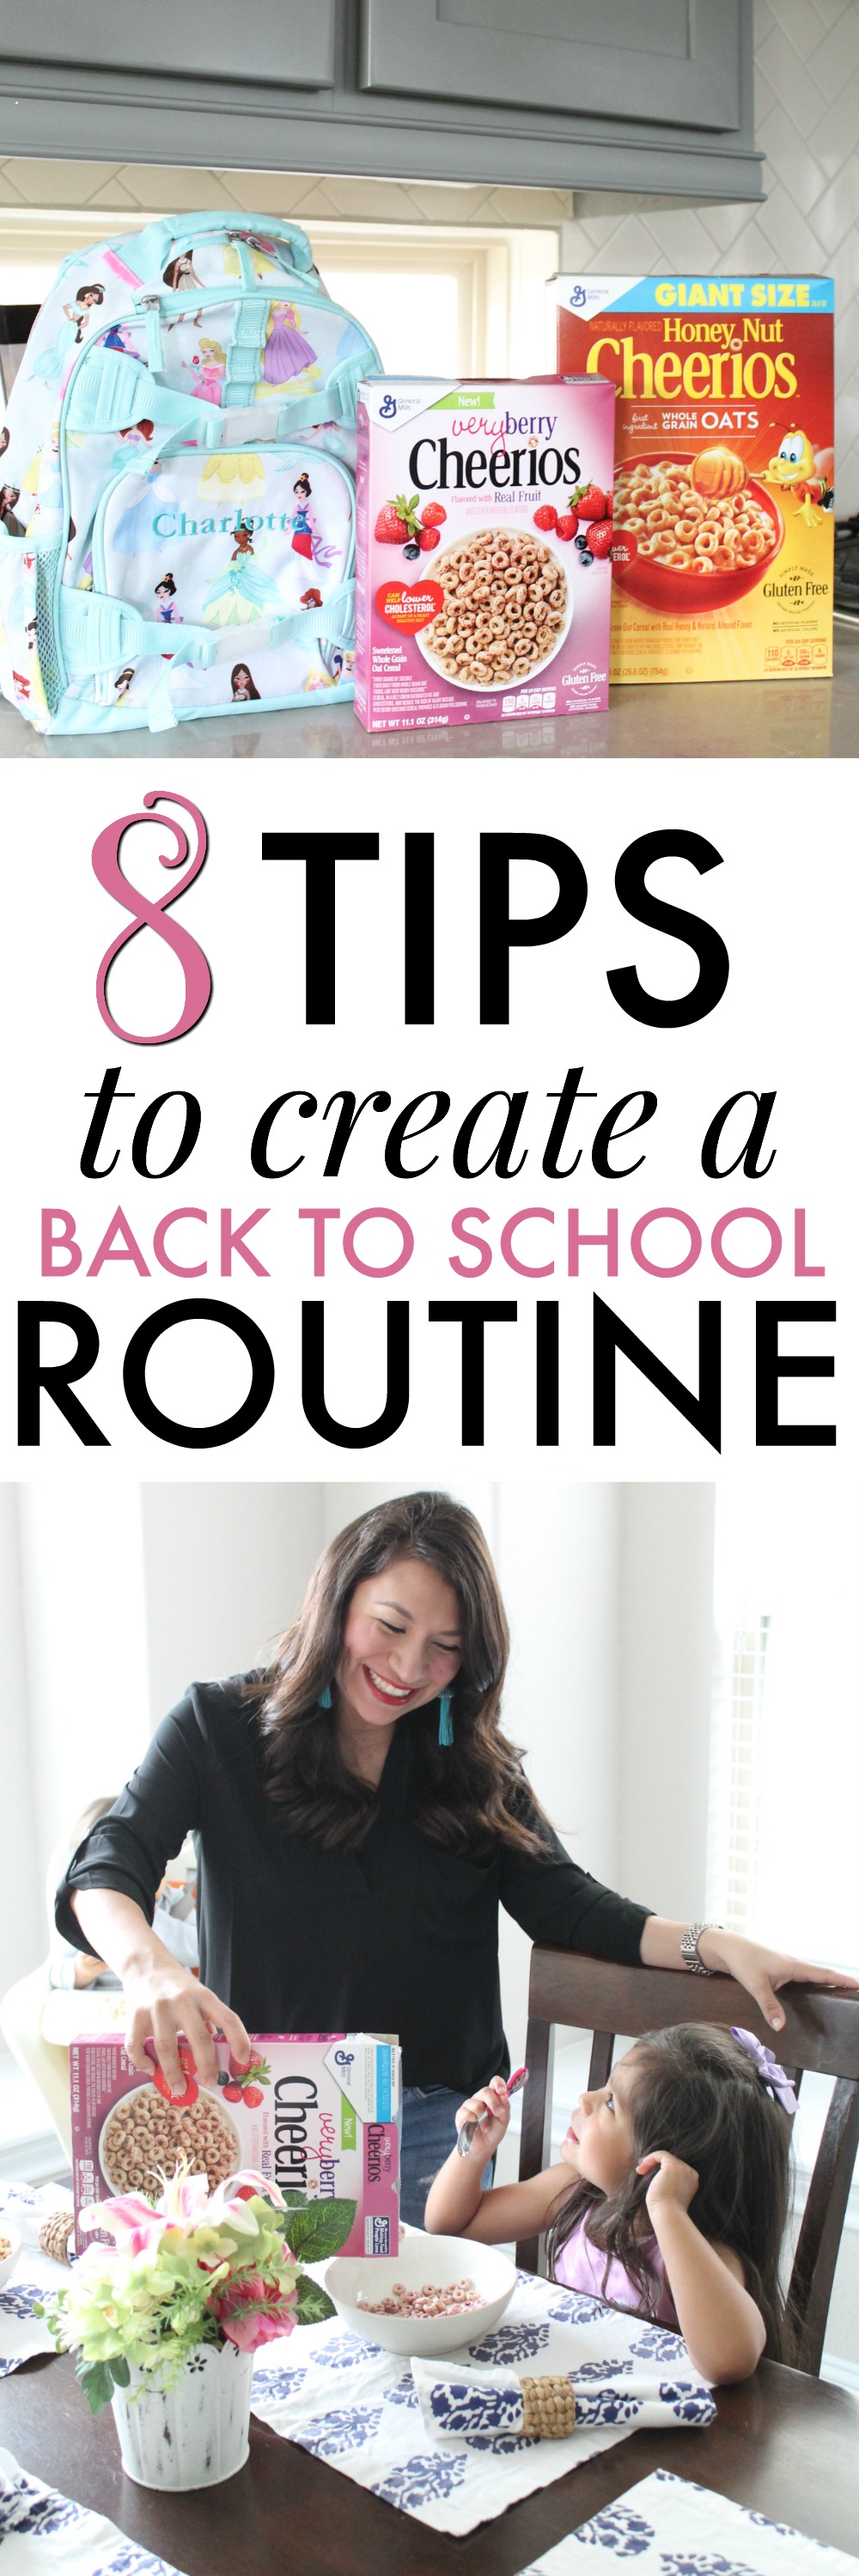 8 Tips for a Back-to-School Routine. All the things you need to kick-start the organization in your life. #ad #backtoschool @Cheerios